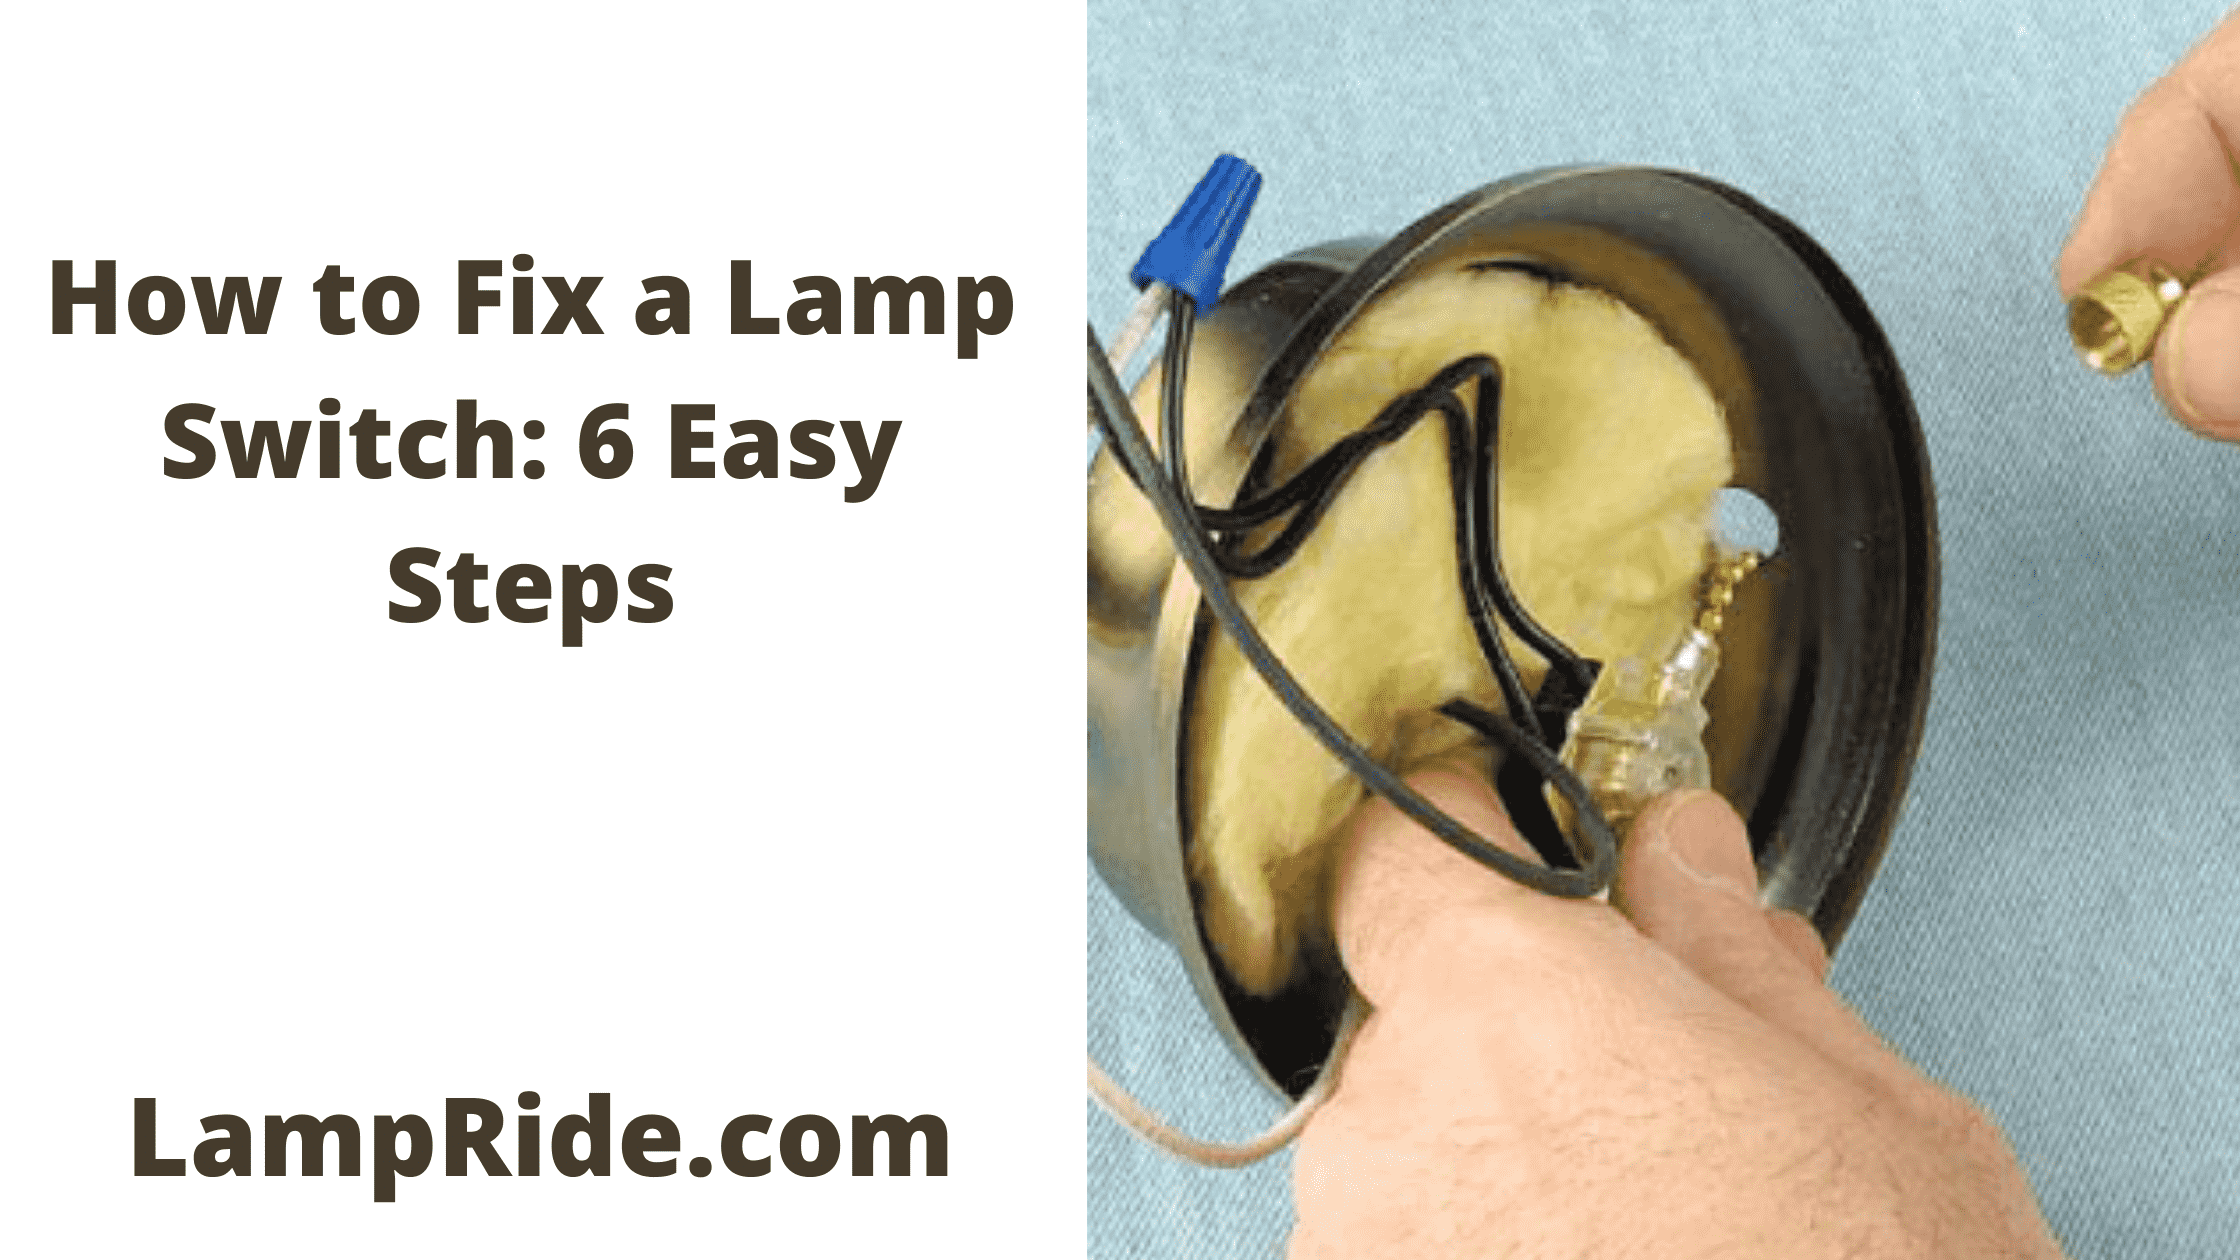 Fix A Lamp Switch In 6 Easy Steps, How To Fix A Lamp Rotary Switch